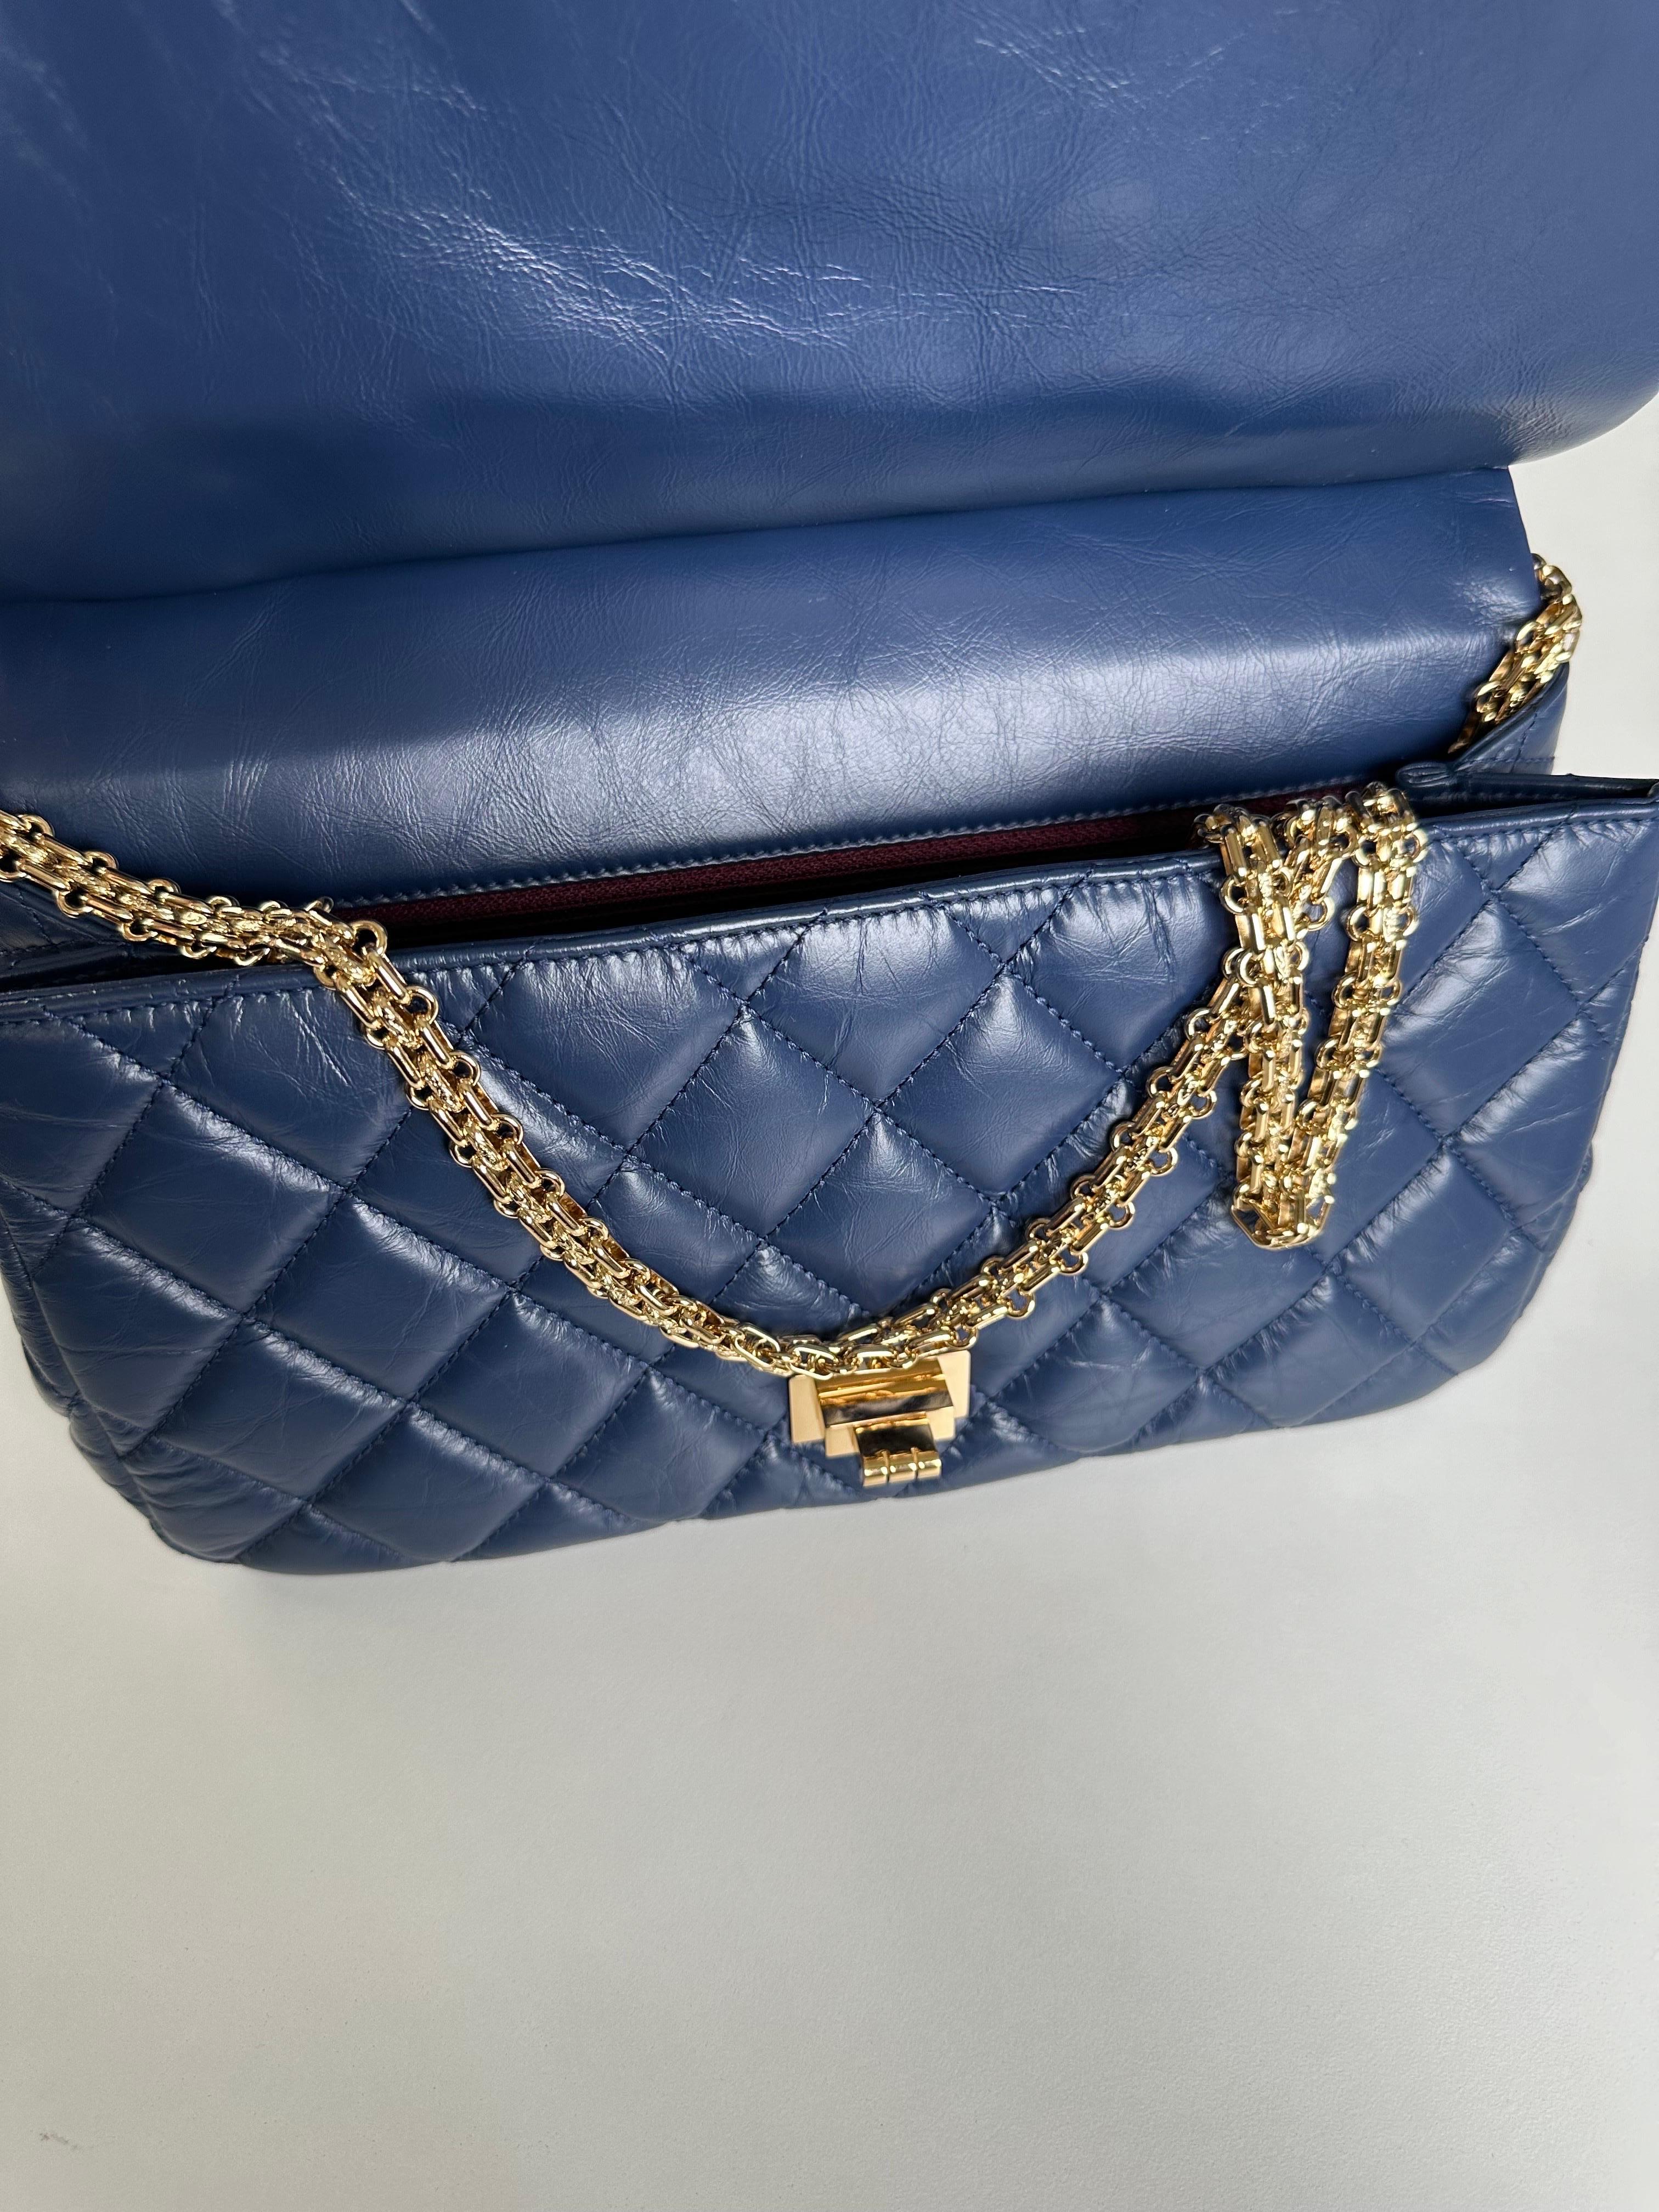 Chanel 2016 Limited Editiion 2.55 Reissue Rare Hanger Navy Blue Classic Flap Bag For Sale 5